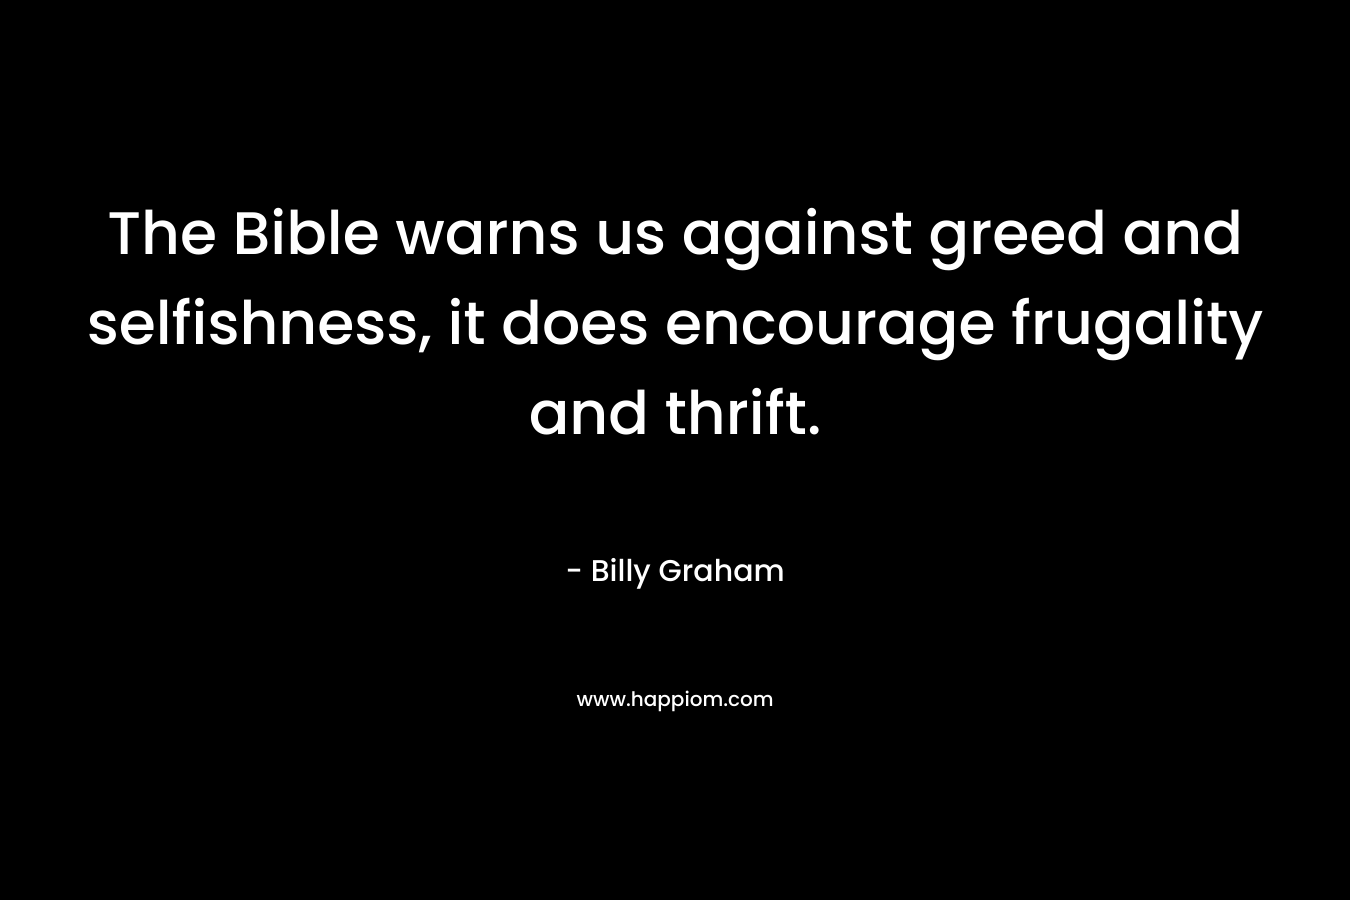 The Bible warns us against greed and selfishness, it does encourage frugality and thrift. – Billy Graham